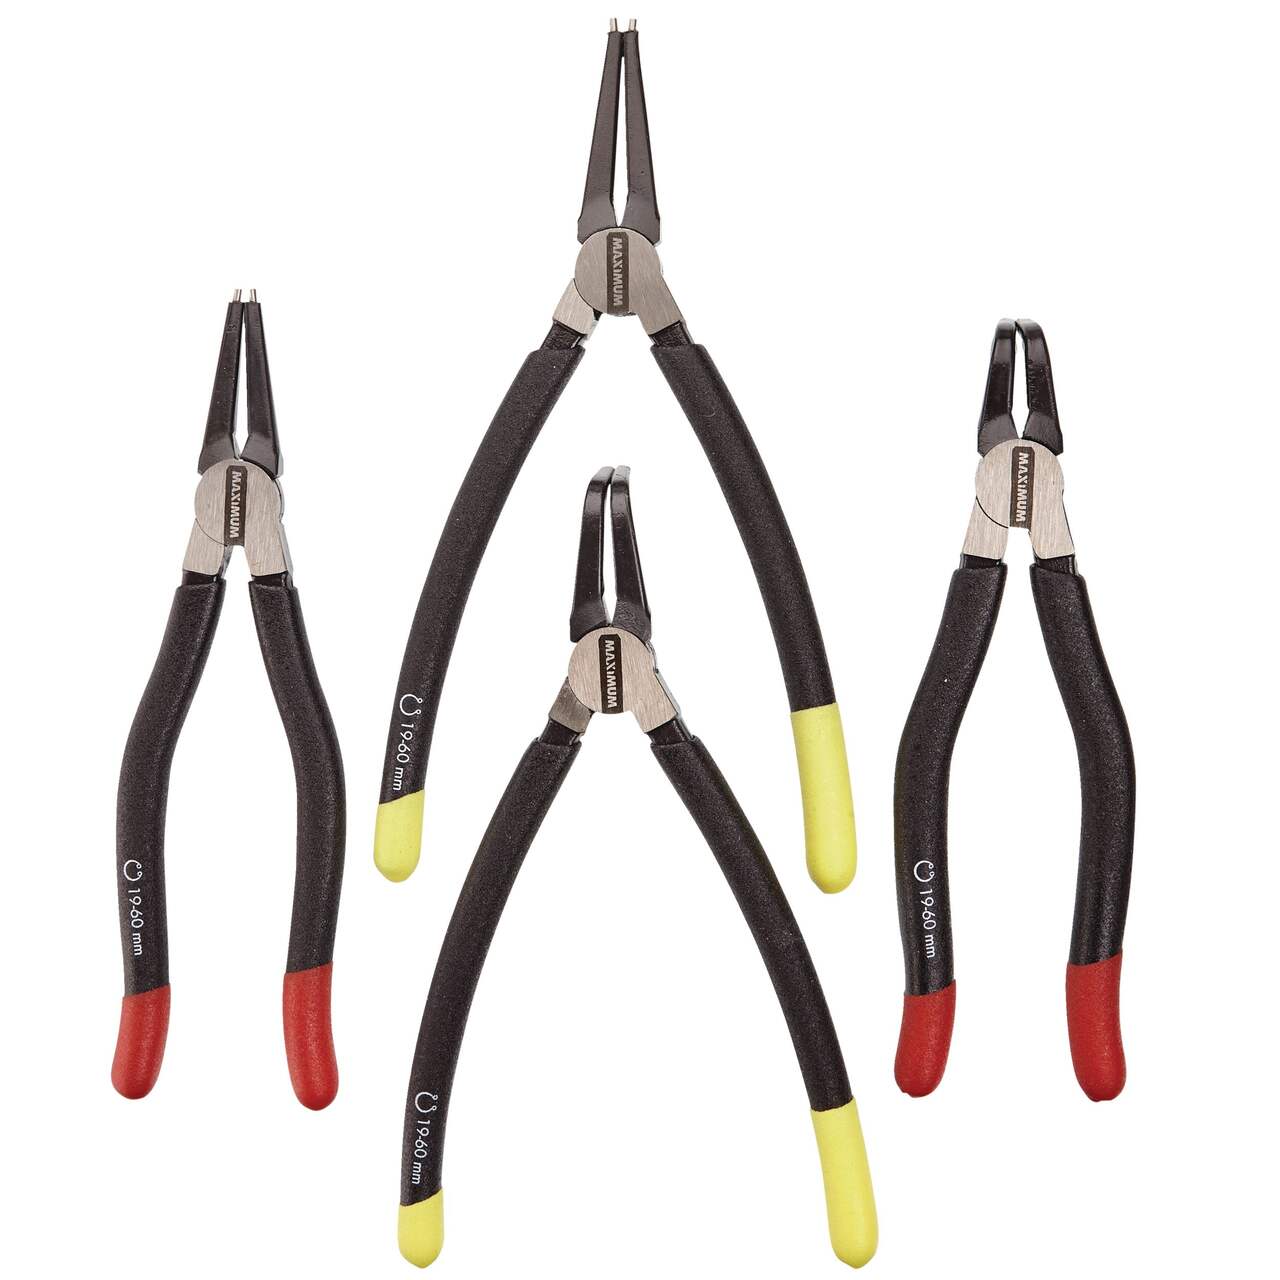 MAXIMUM Snap Ring Pliers Set, High-Quality Forged Tool Steel, Soft Vinyl  Grip, Colour Coded Tips, 4-pc